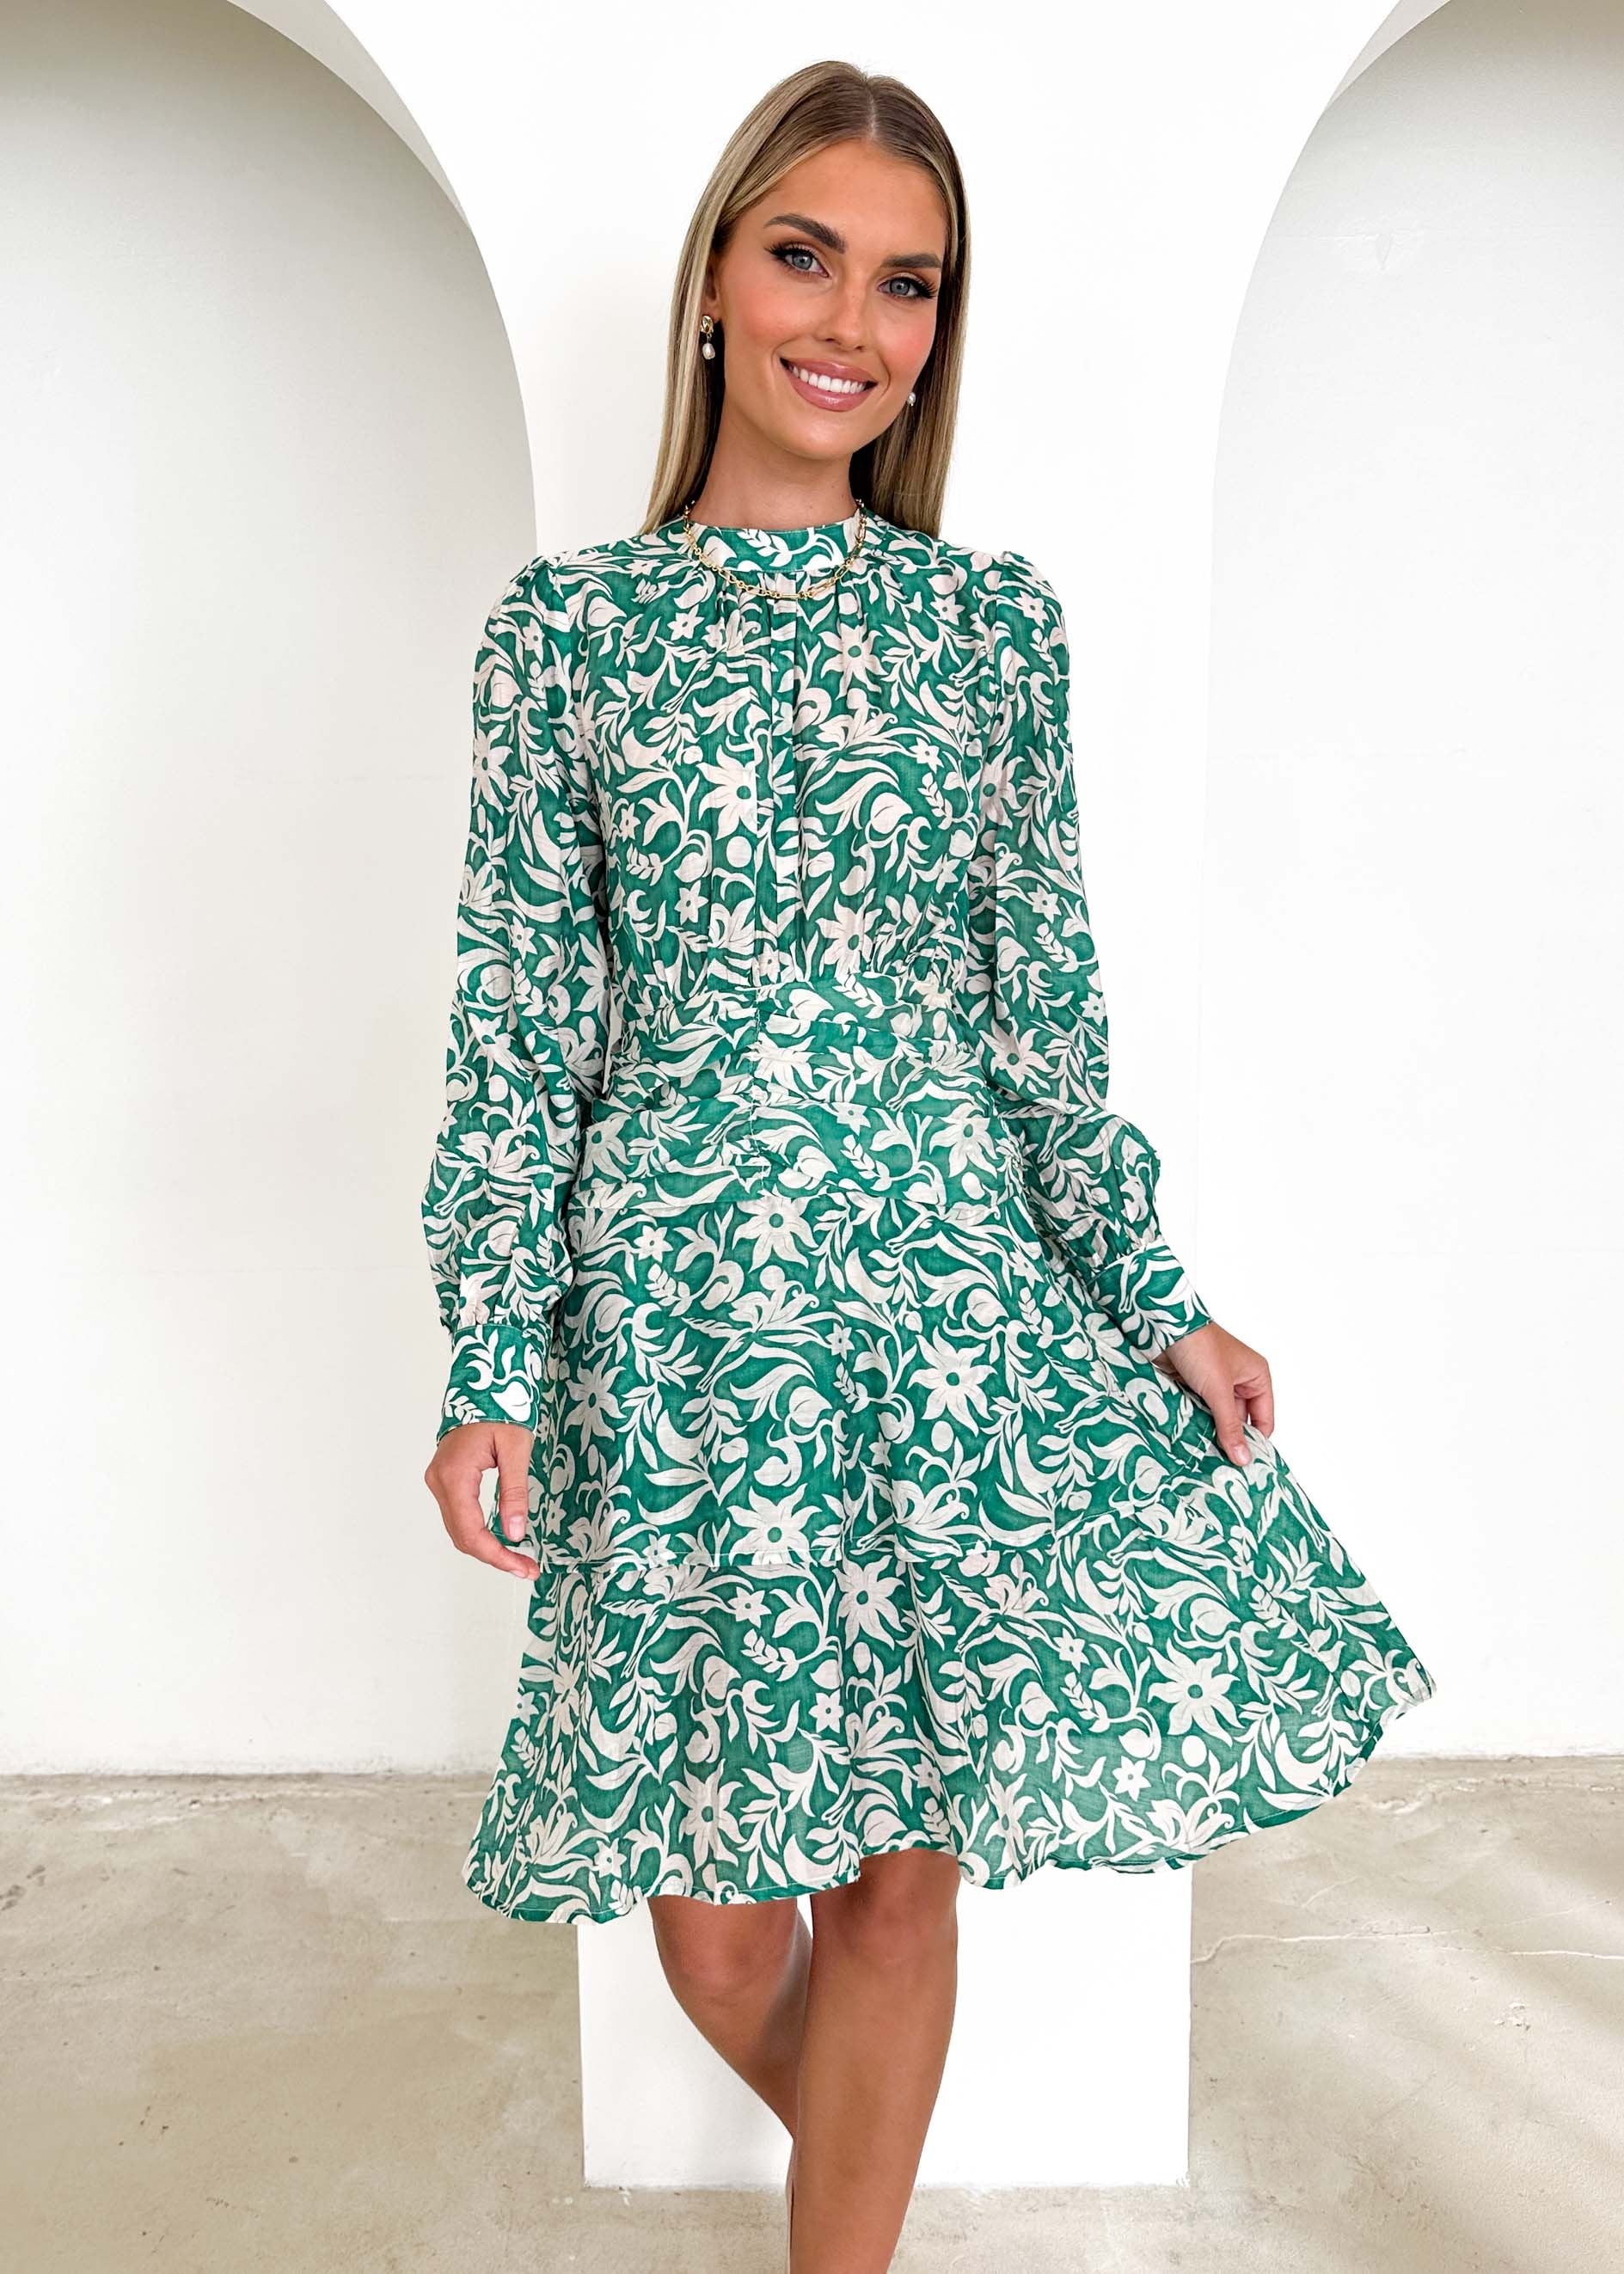 Chickro Dress - Green Floral